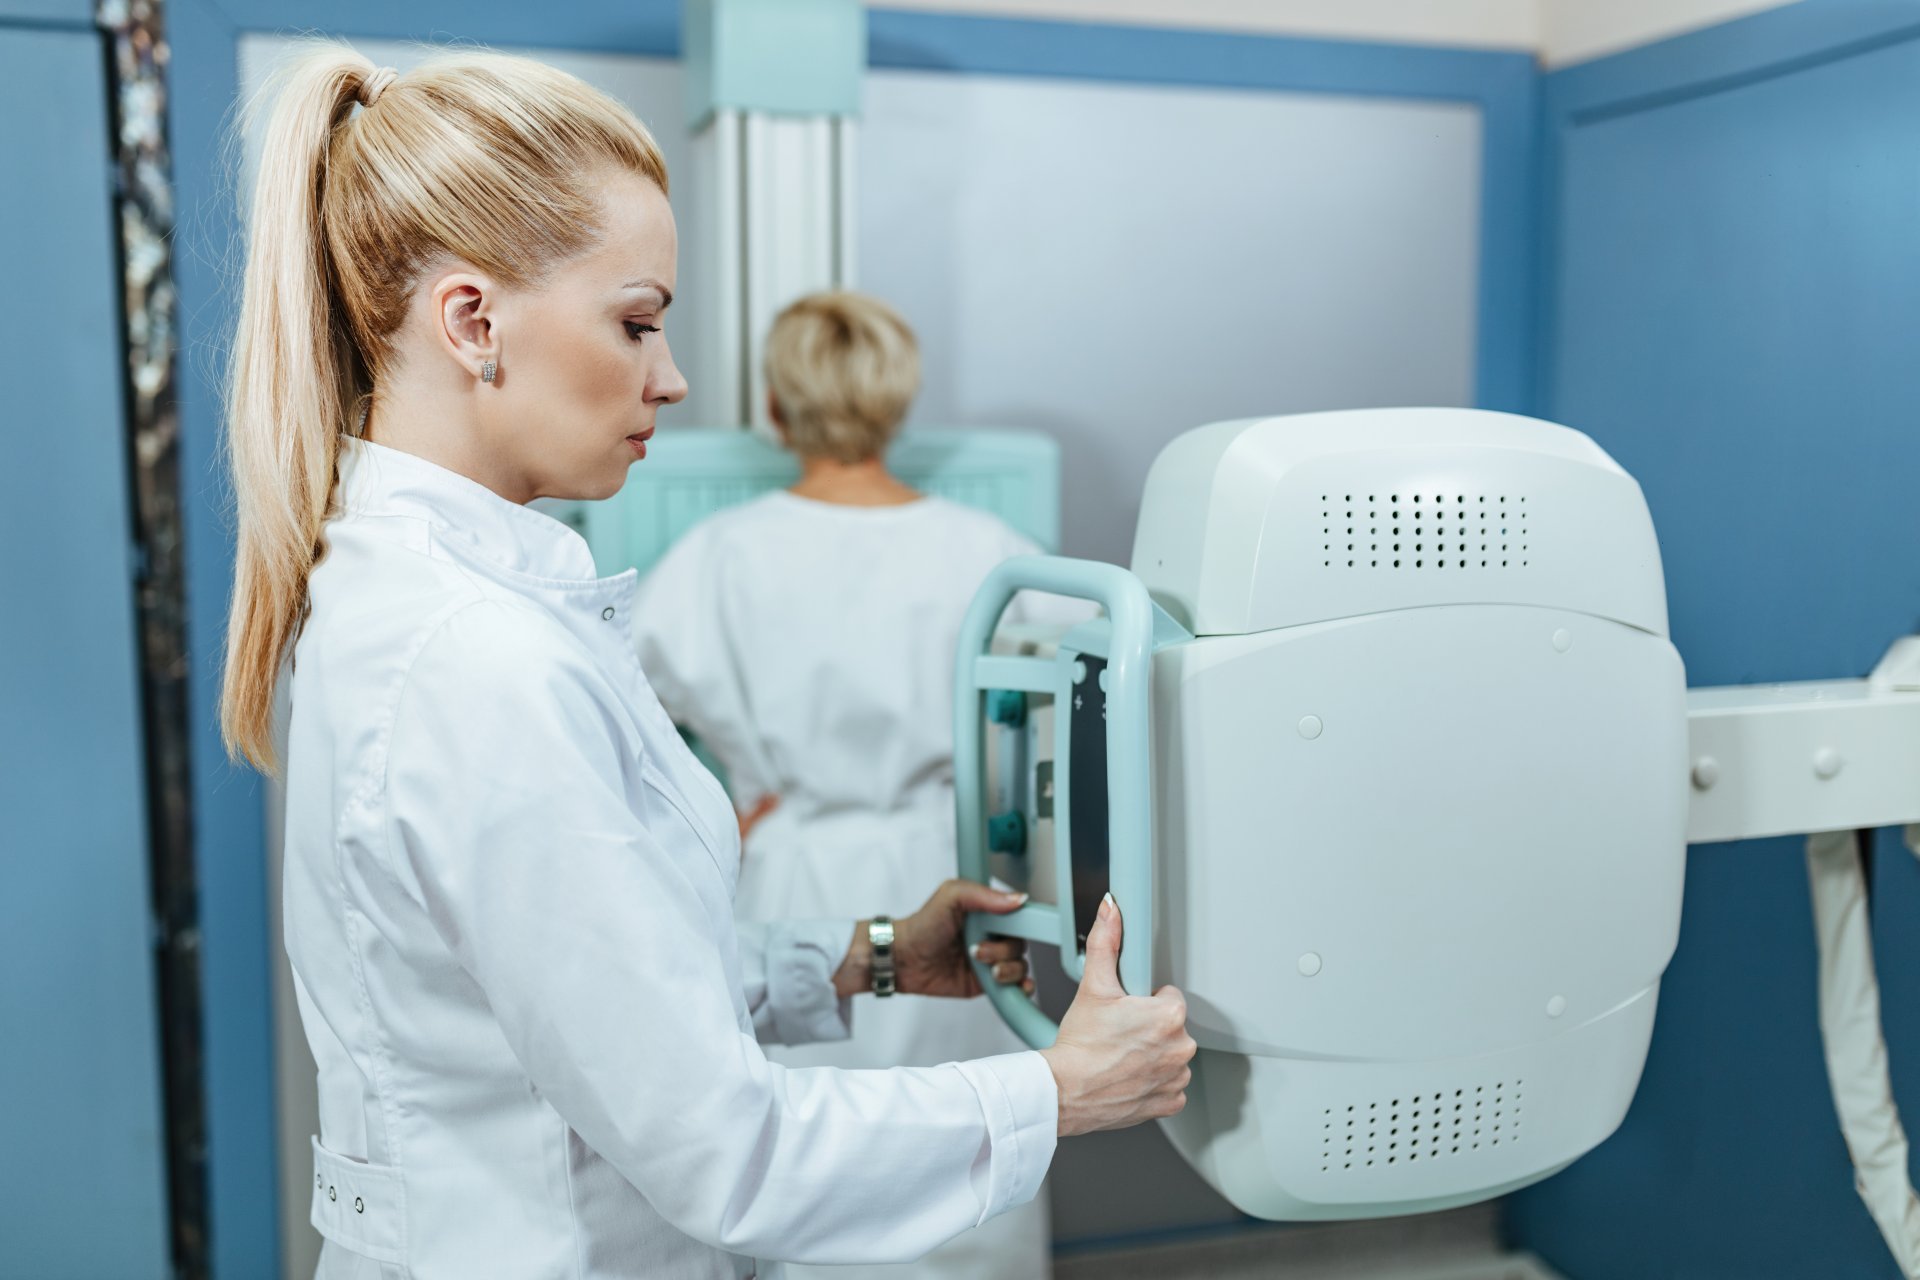 A female radiologic technologist positions an imaging machine.